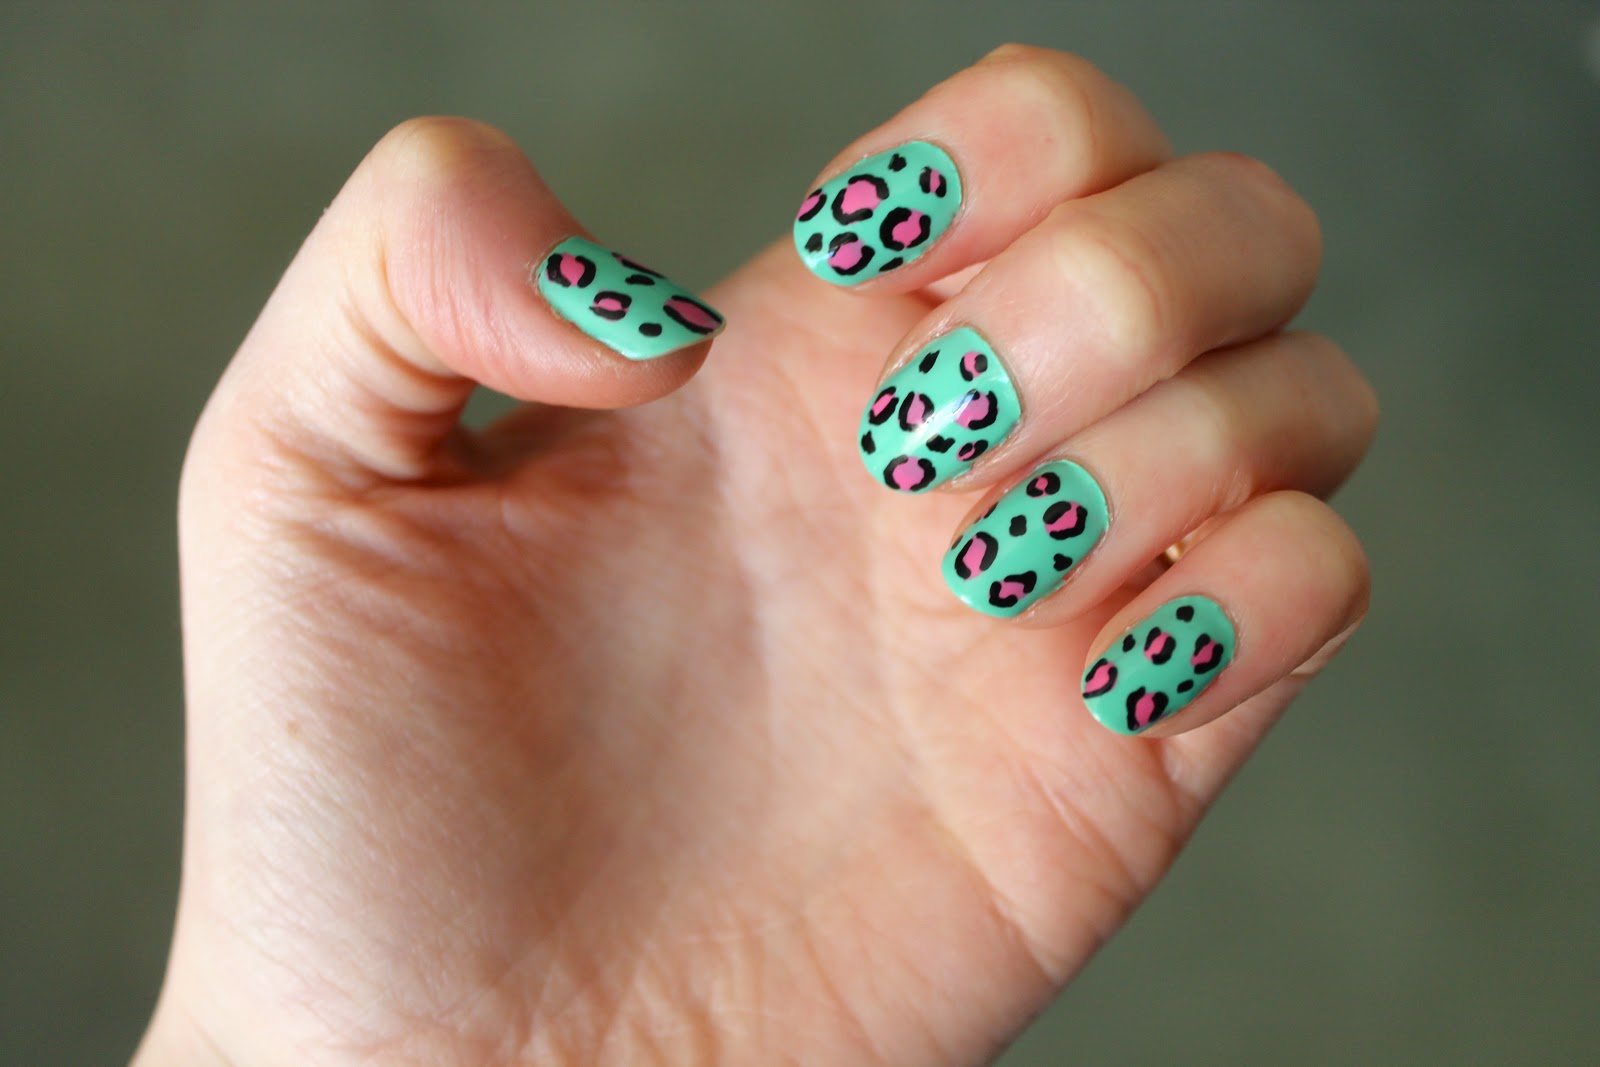 5. Cute Animal Print Nail Design for Long Nails - wide 10